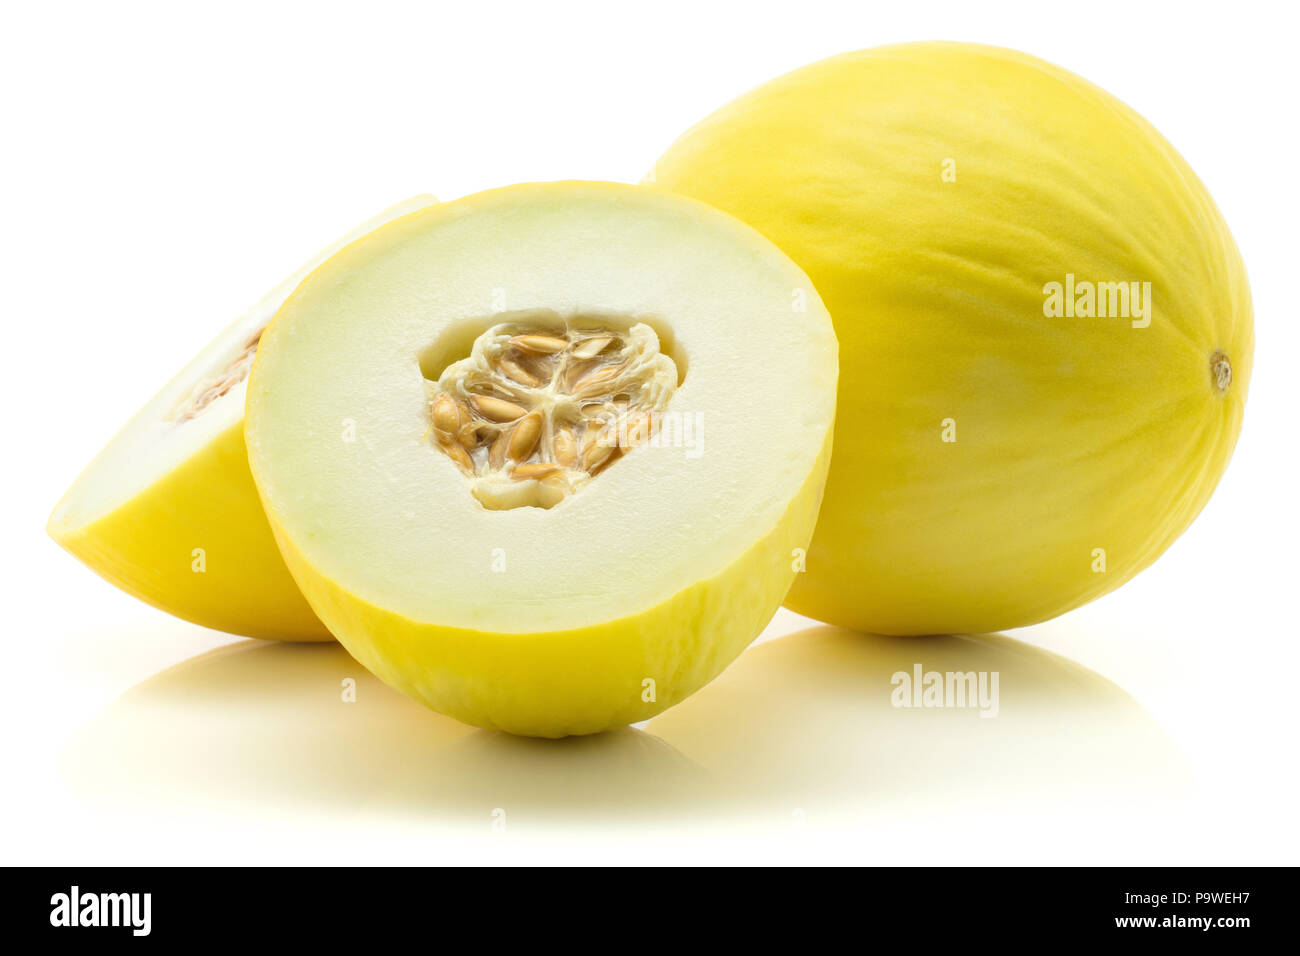 Yellow honeydew melon set, one cut in half and one whole, isolated on white background, two halves with seeds Stock Photo